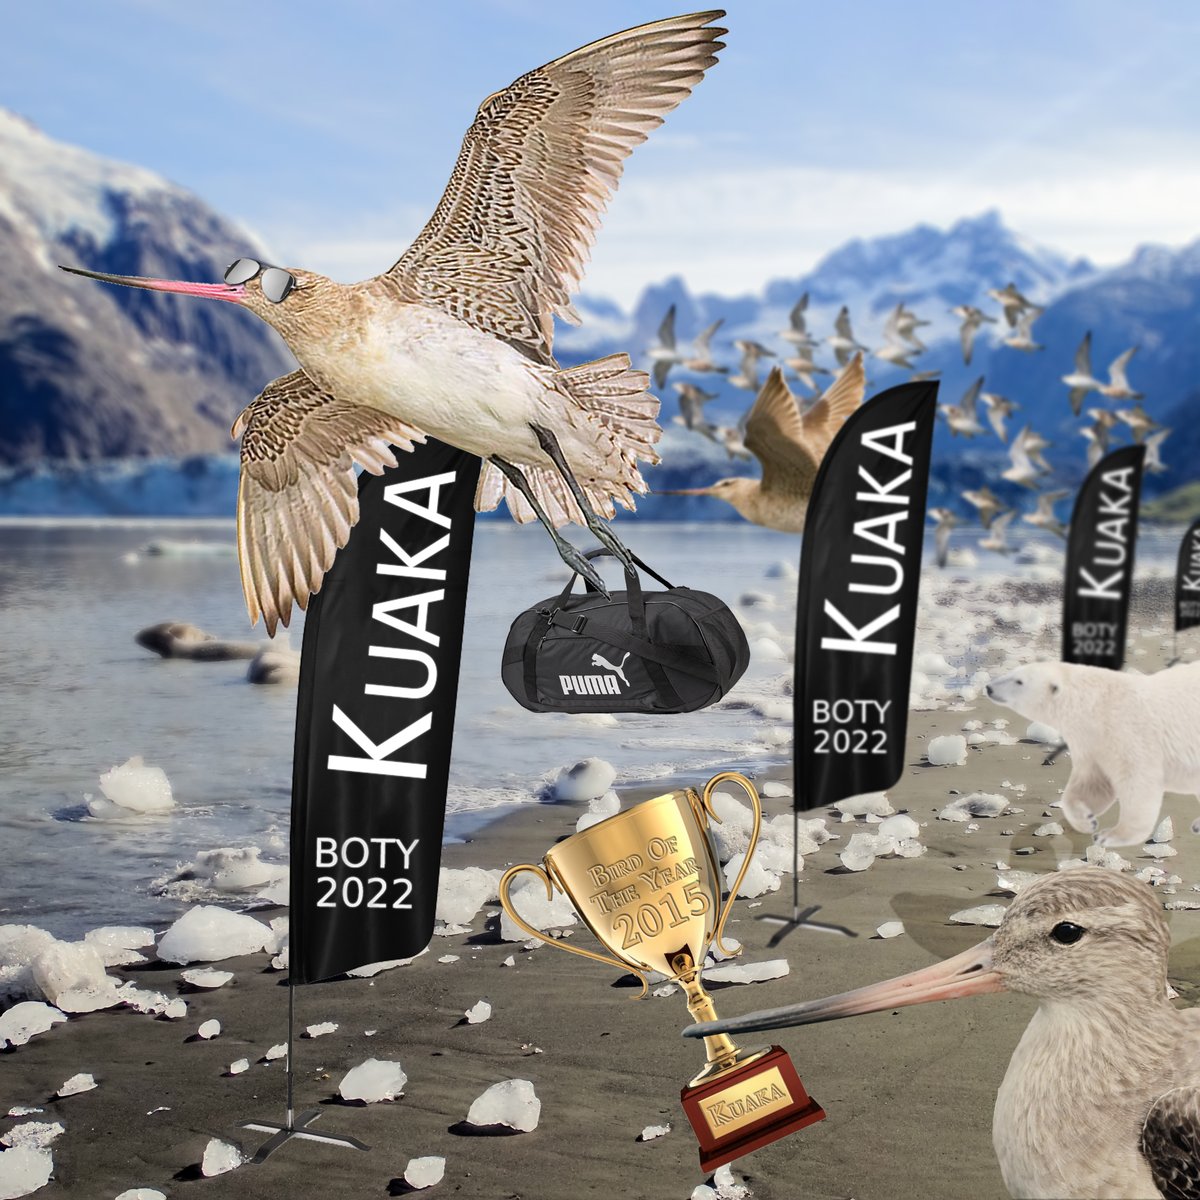 Heard that last years' BOTY was won by a BAT 🥴

Dw Aotearoa, your favourite underbird is back to smash the competition & secure another win for the waders💪

#KuakaforBOTY22 #Kuaka #MightyKuaka #birdoftheyear2022 #BirdOfTheYear #nzbirdoftheyear #boty2022 @Forest_and_Bird